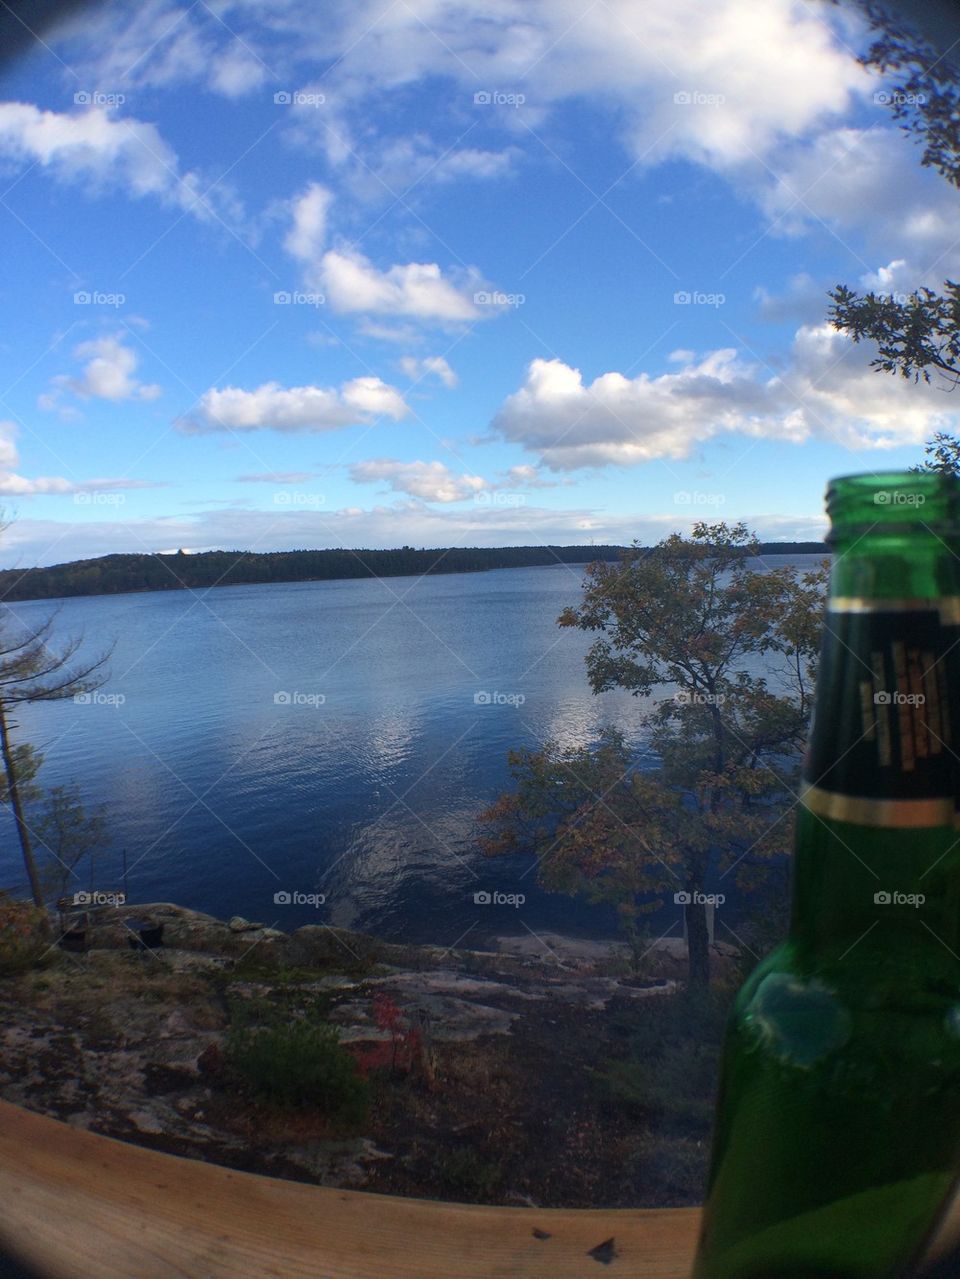 A beer bottle's view